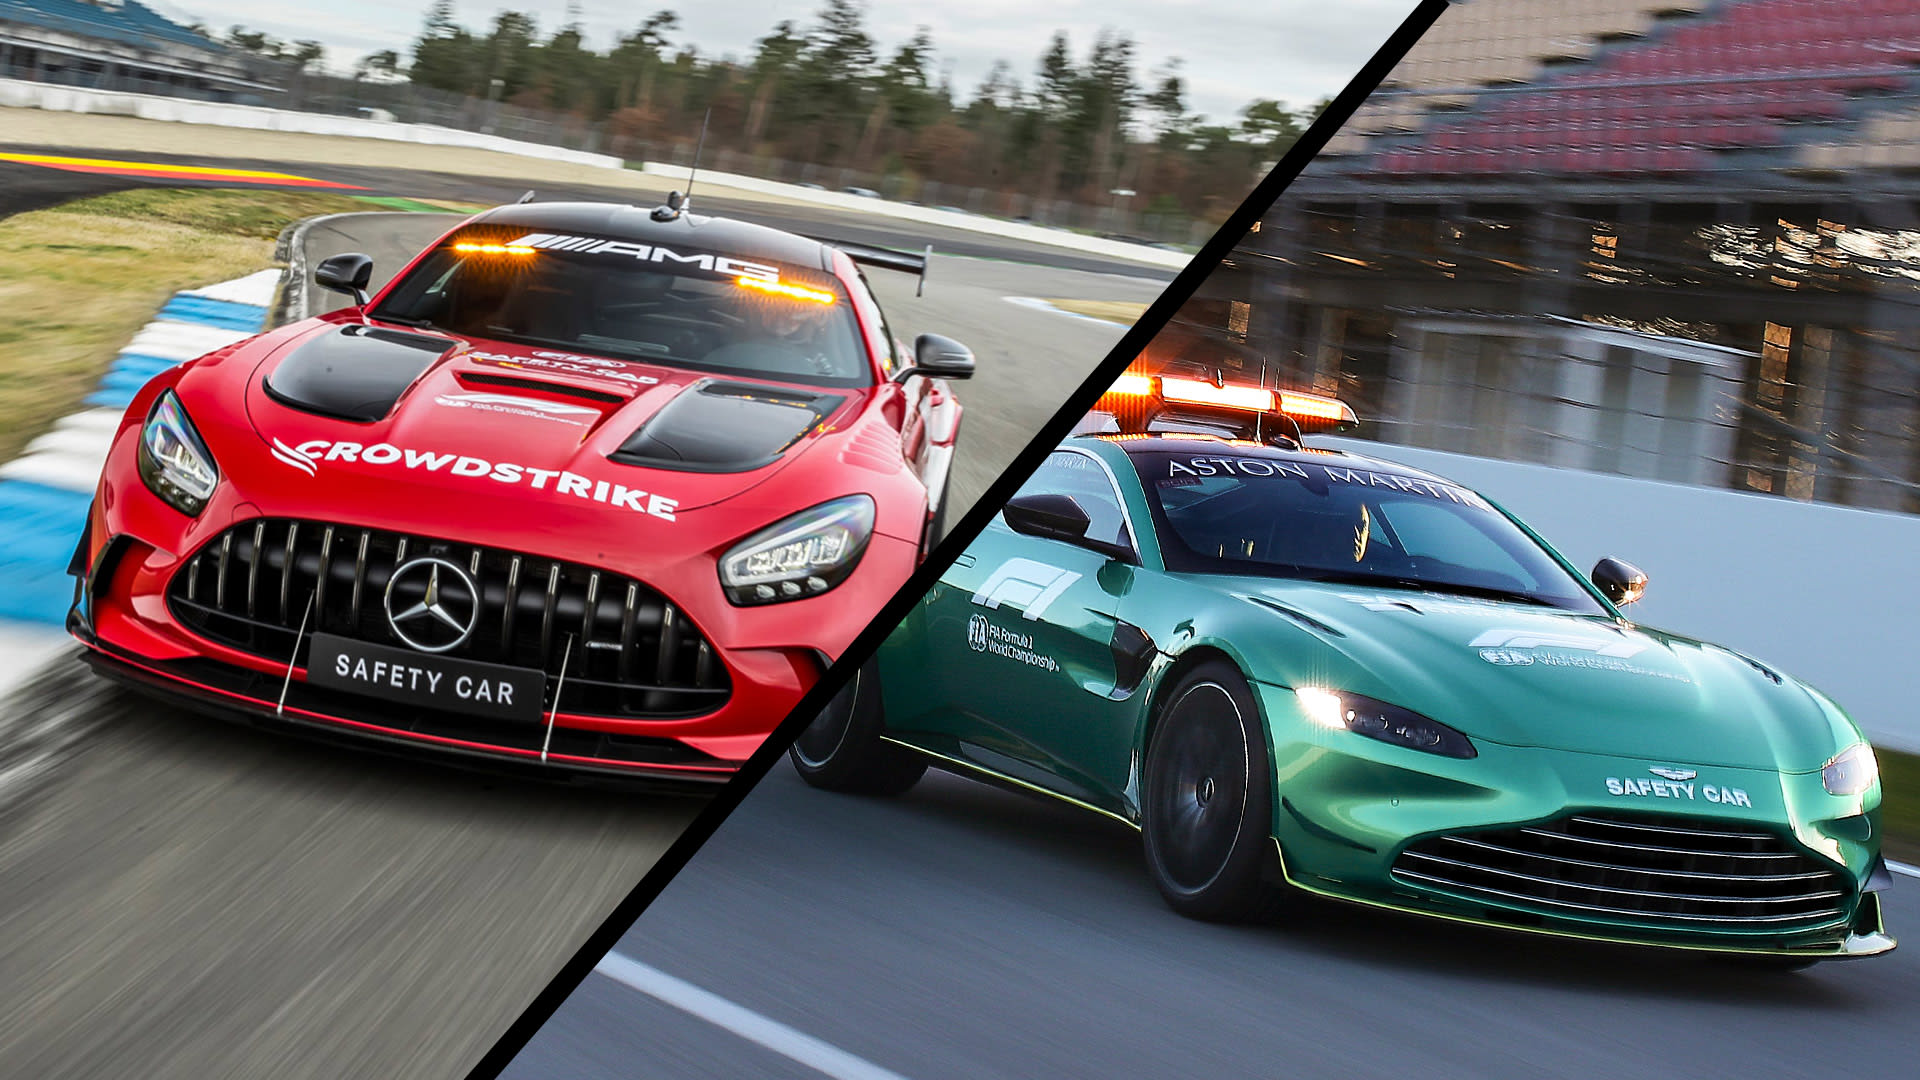 GALLERY View the brand-new 2022 Mercedes AMG and Aston Martin Safety Cars Formula 1®